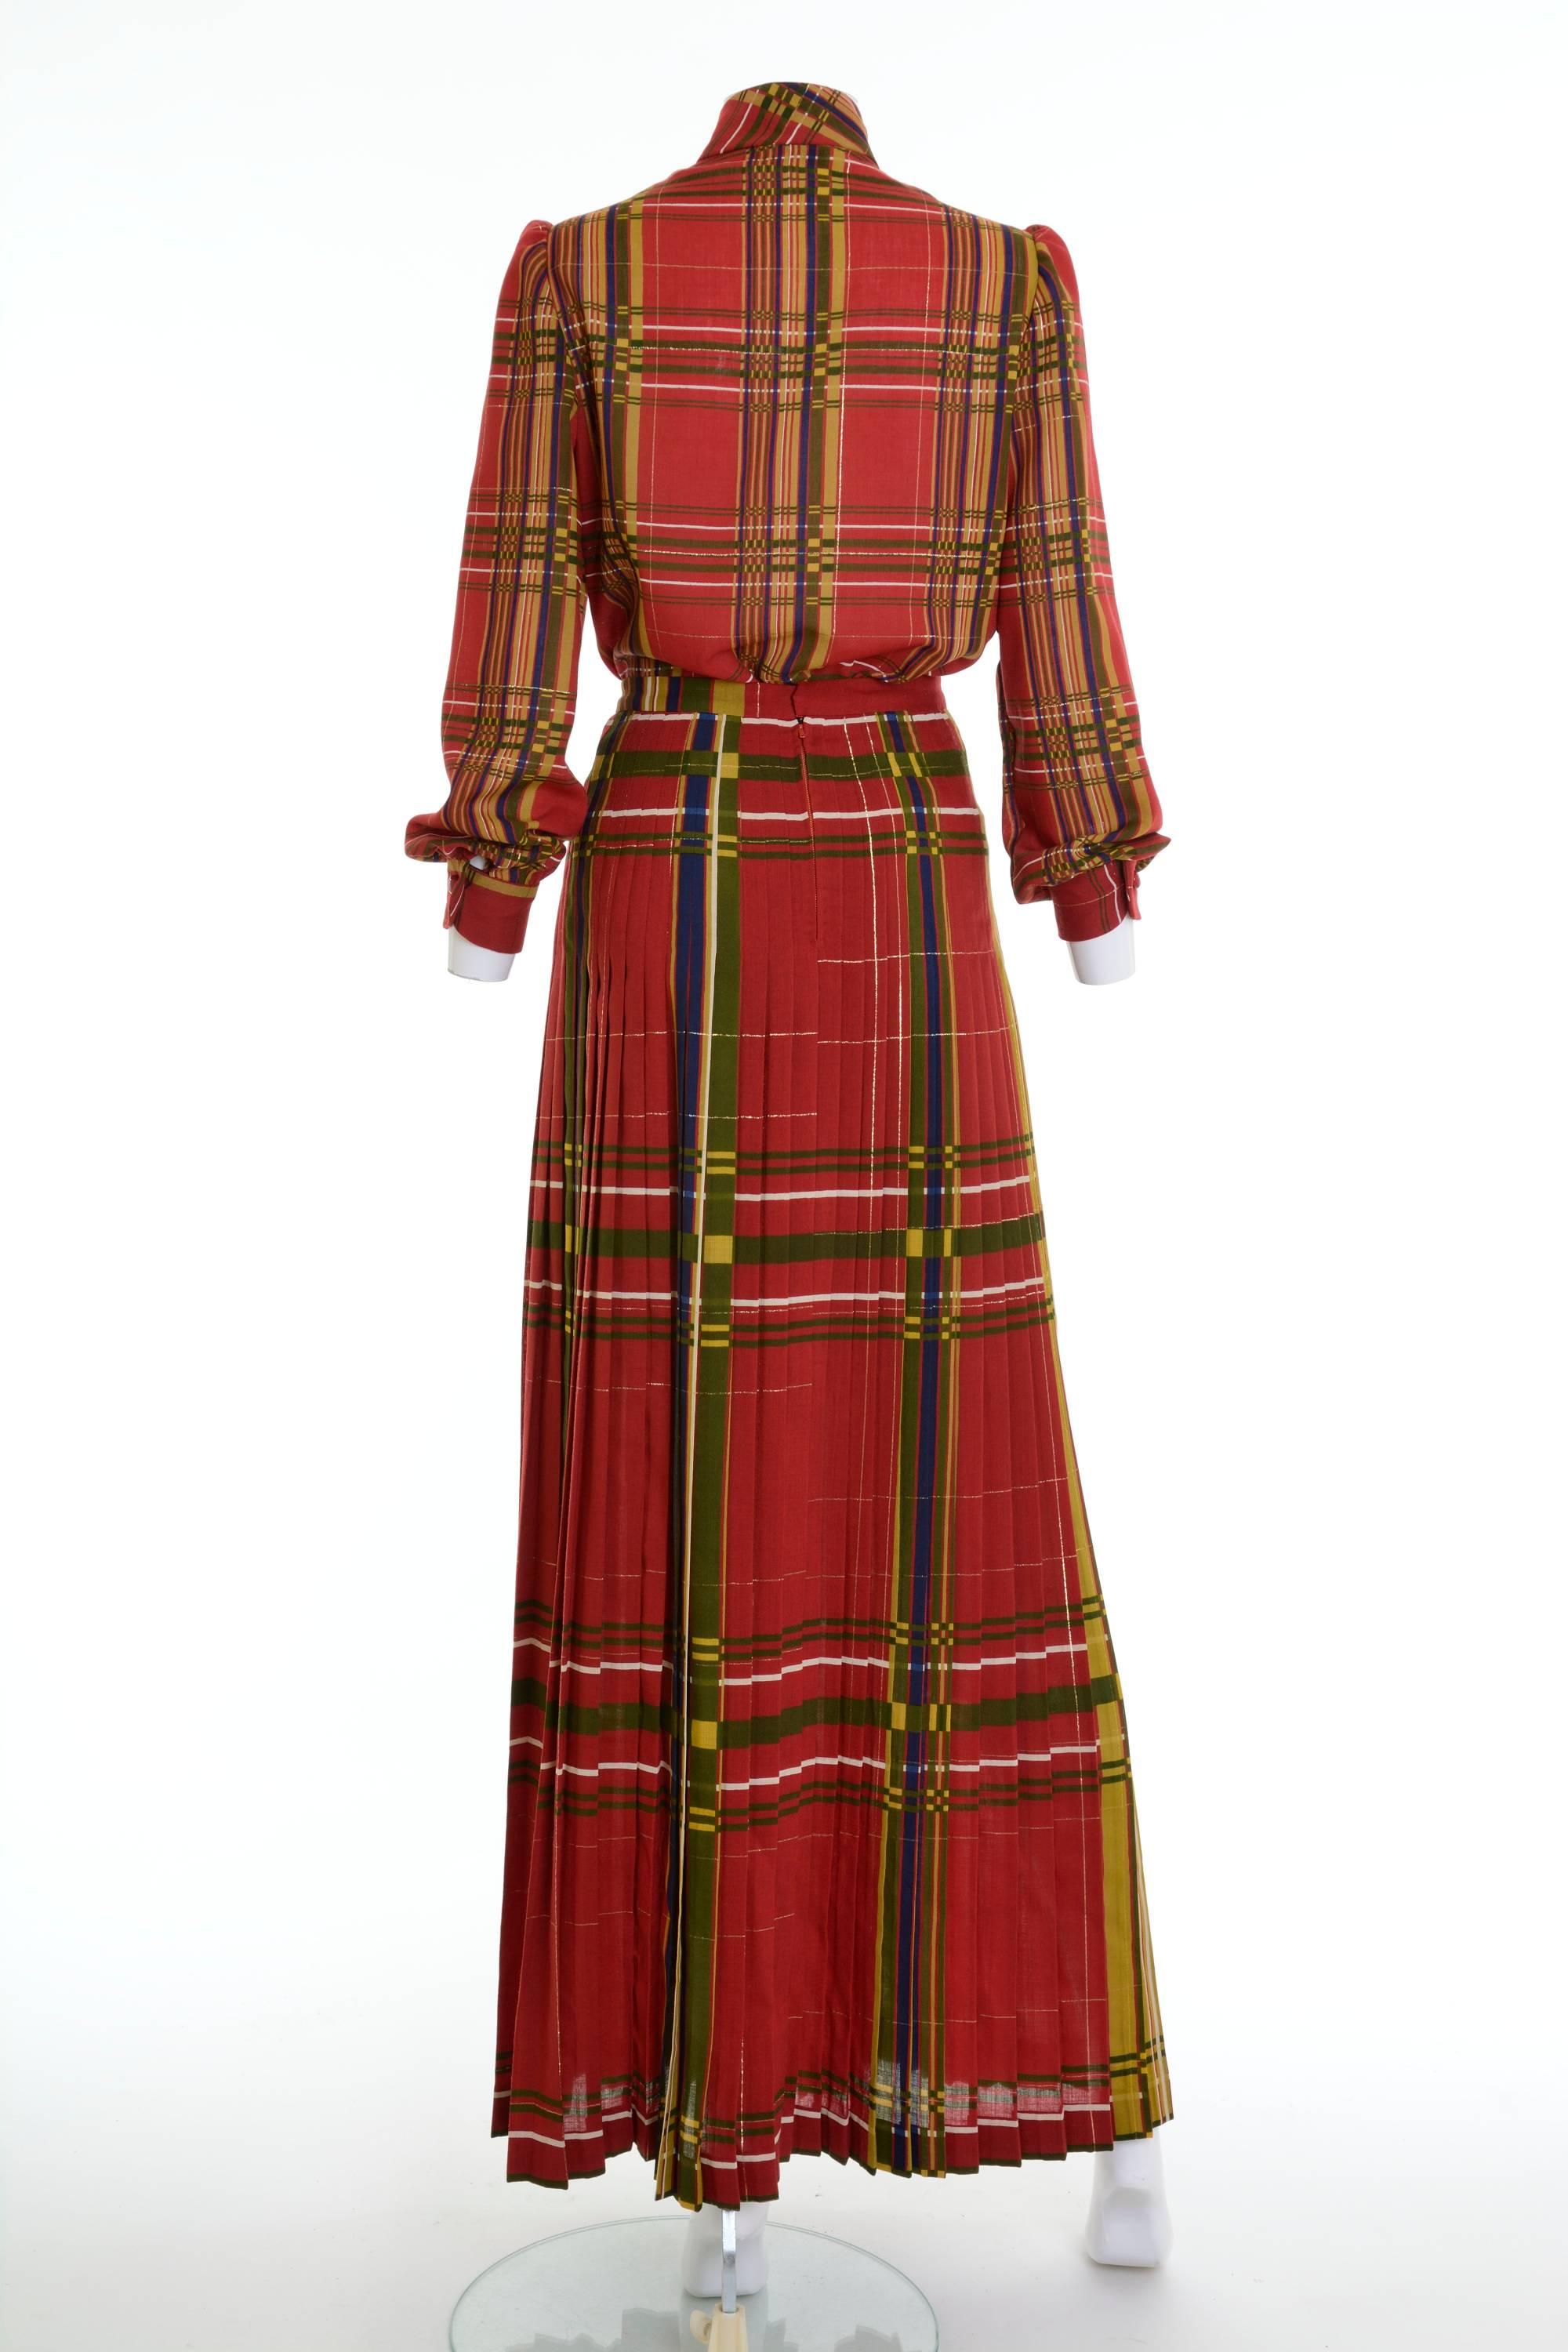 This lovely Valentino Boutique suit dress is in red and green tartan woolen fabric with lurex details. The shirt has mandarin collar, puffed long sleeves and plastic buttons closure. The long pleateds skirt has back zip and hooks closure.